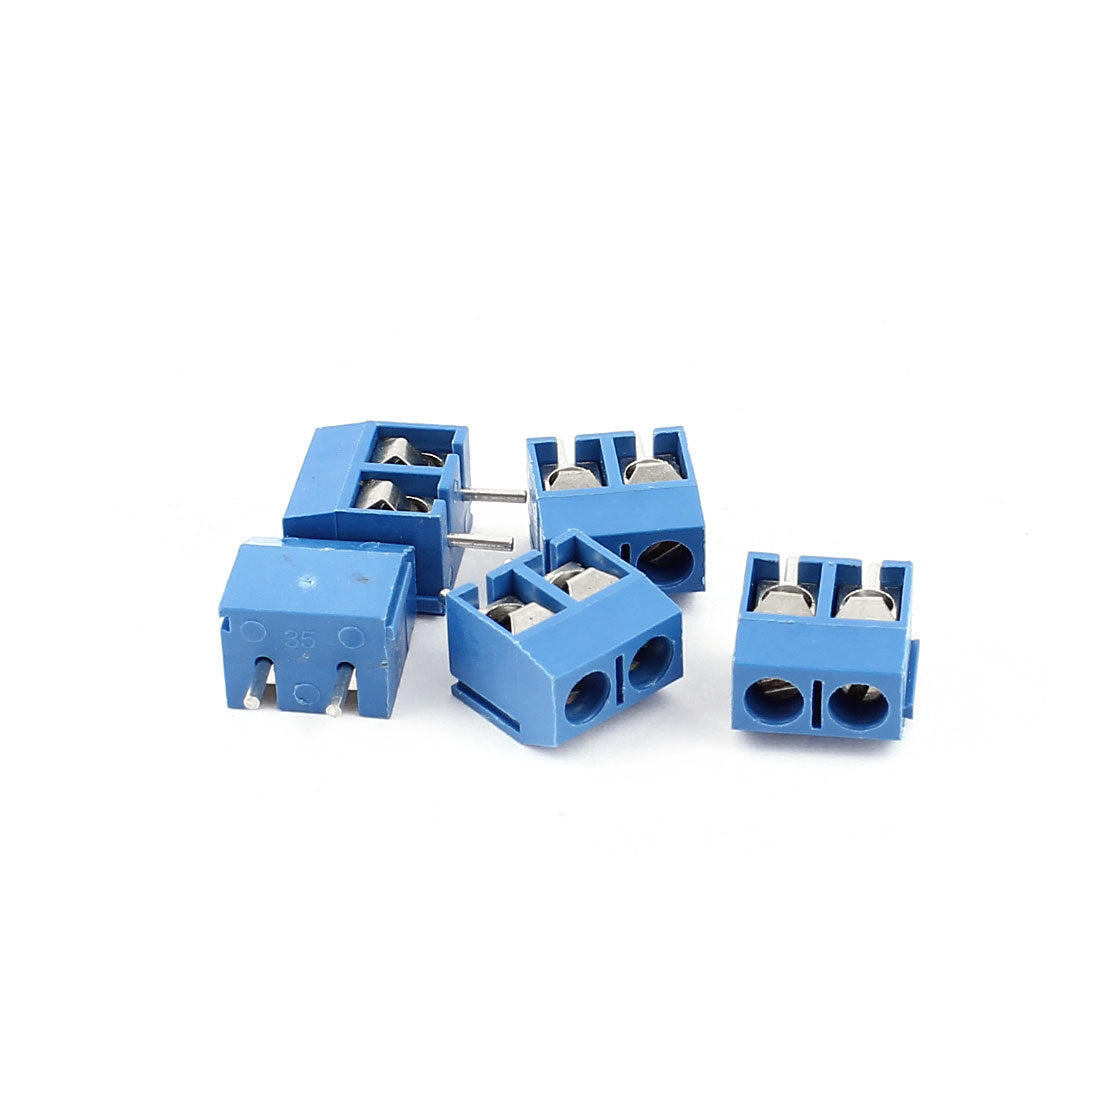 uxcell Uxcell 5pcs 5.08mm 2pole in Panel PCB Mount Screw Terminal Block Connector